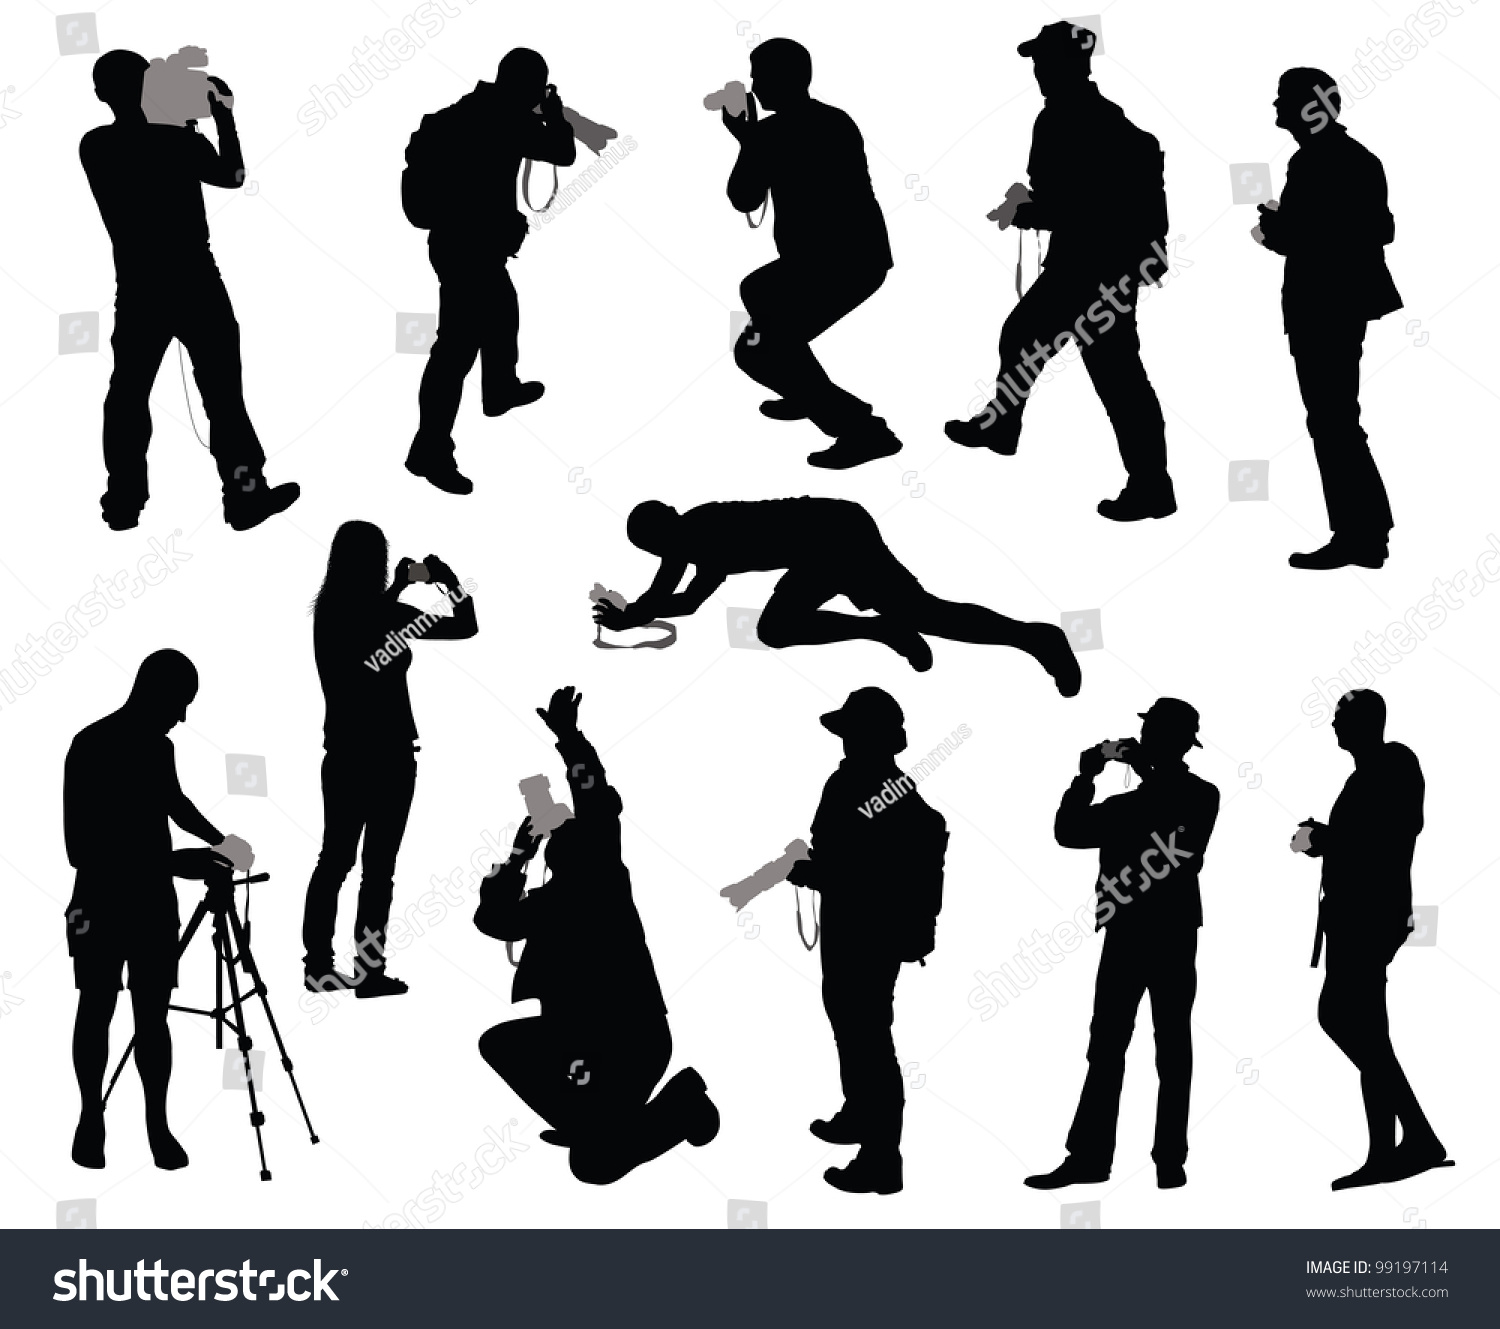 Silhouettes People Taking Photos Stock Vector 99197114 - Shutterstock